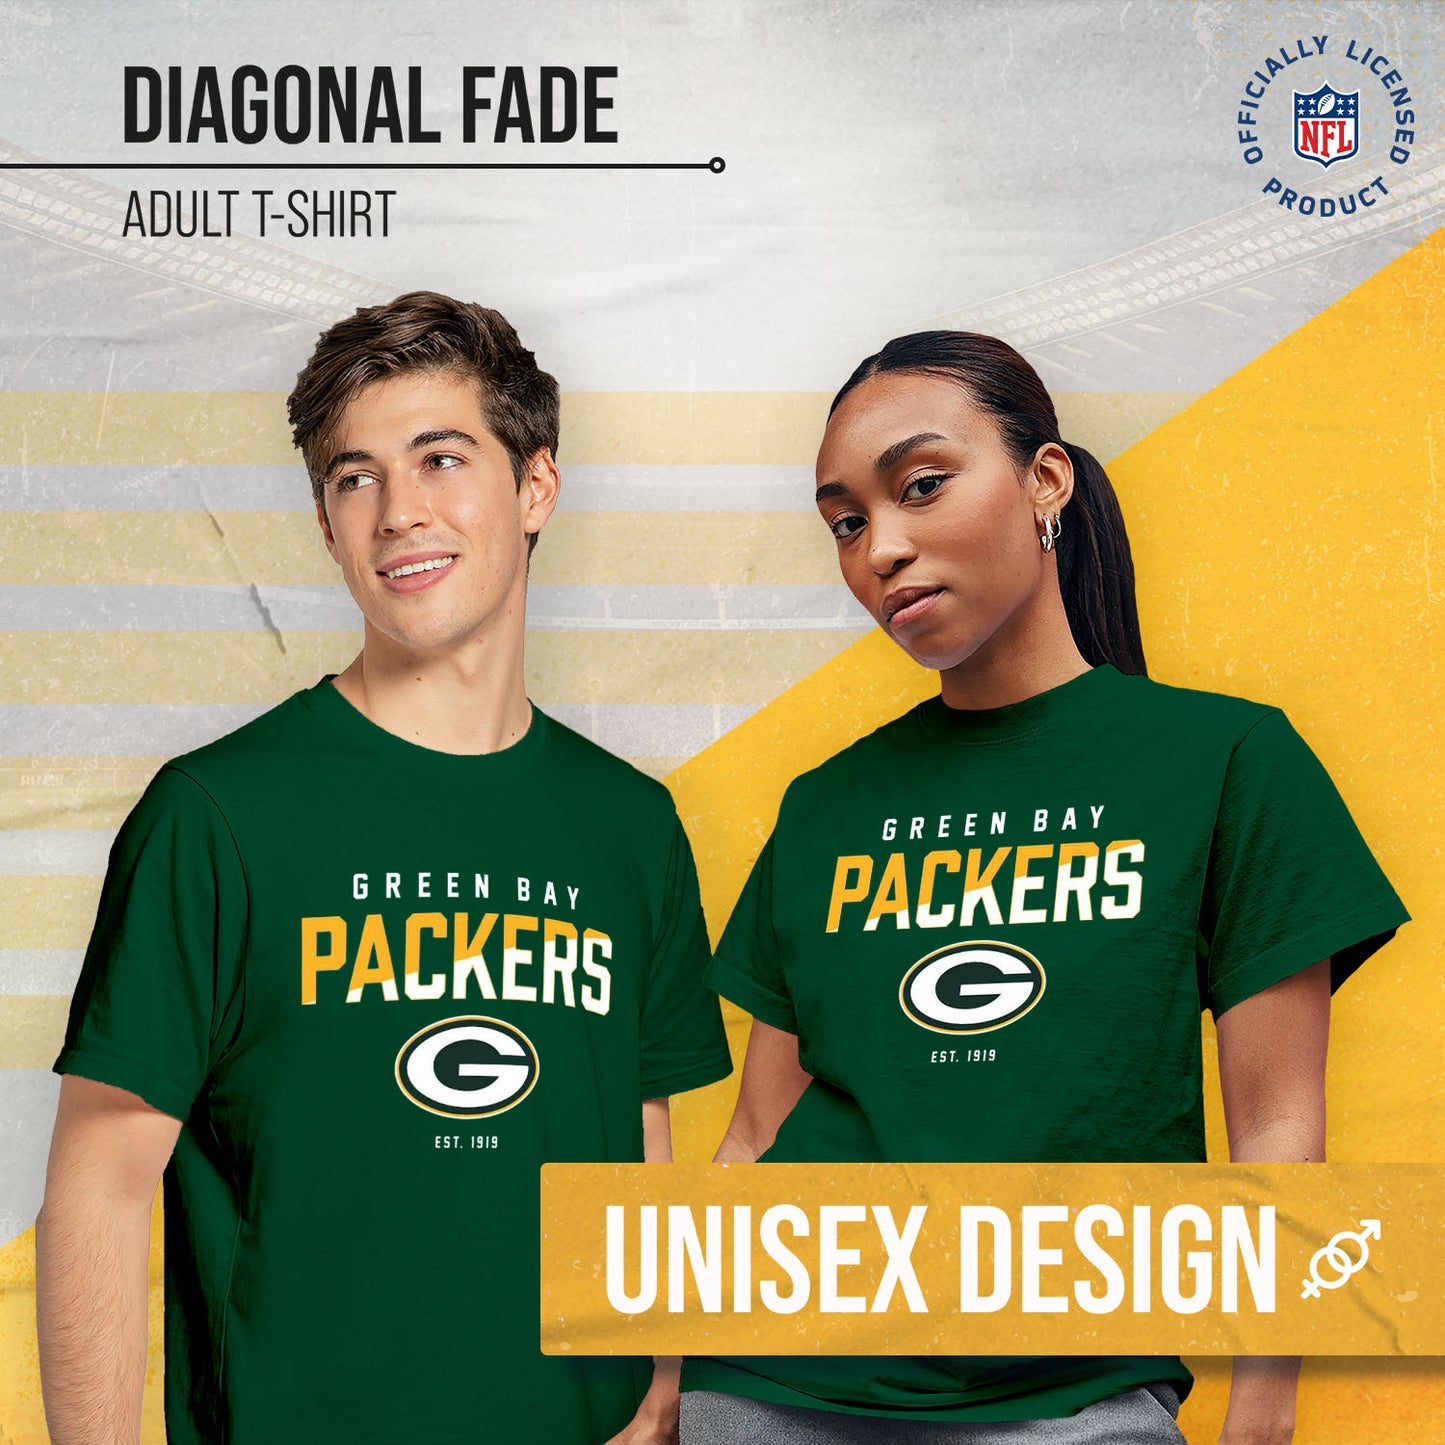 Green Bay Packers Adult NFL Diagonal Fade Color Block T-Shirt - Forest Green